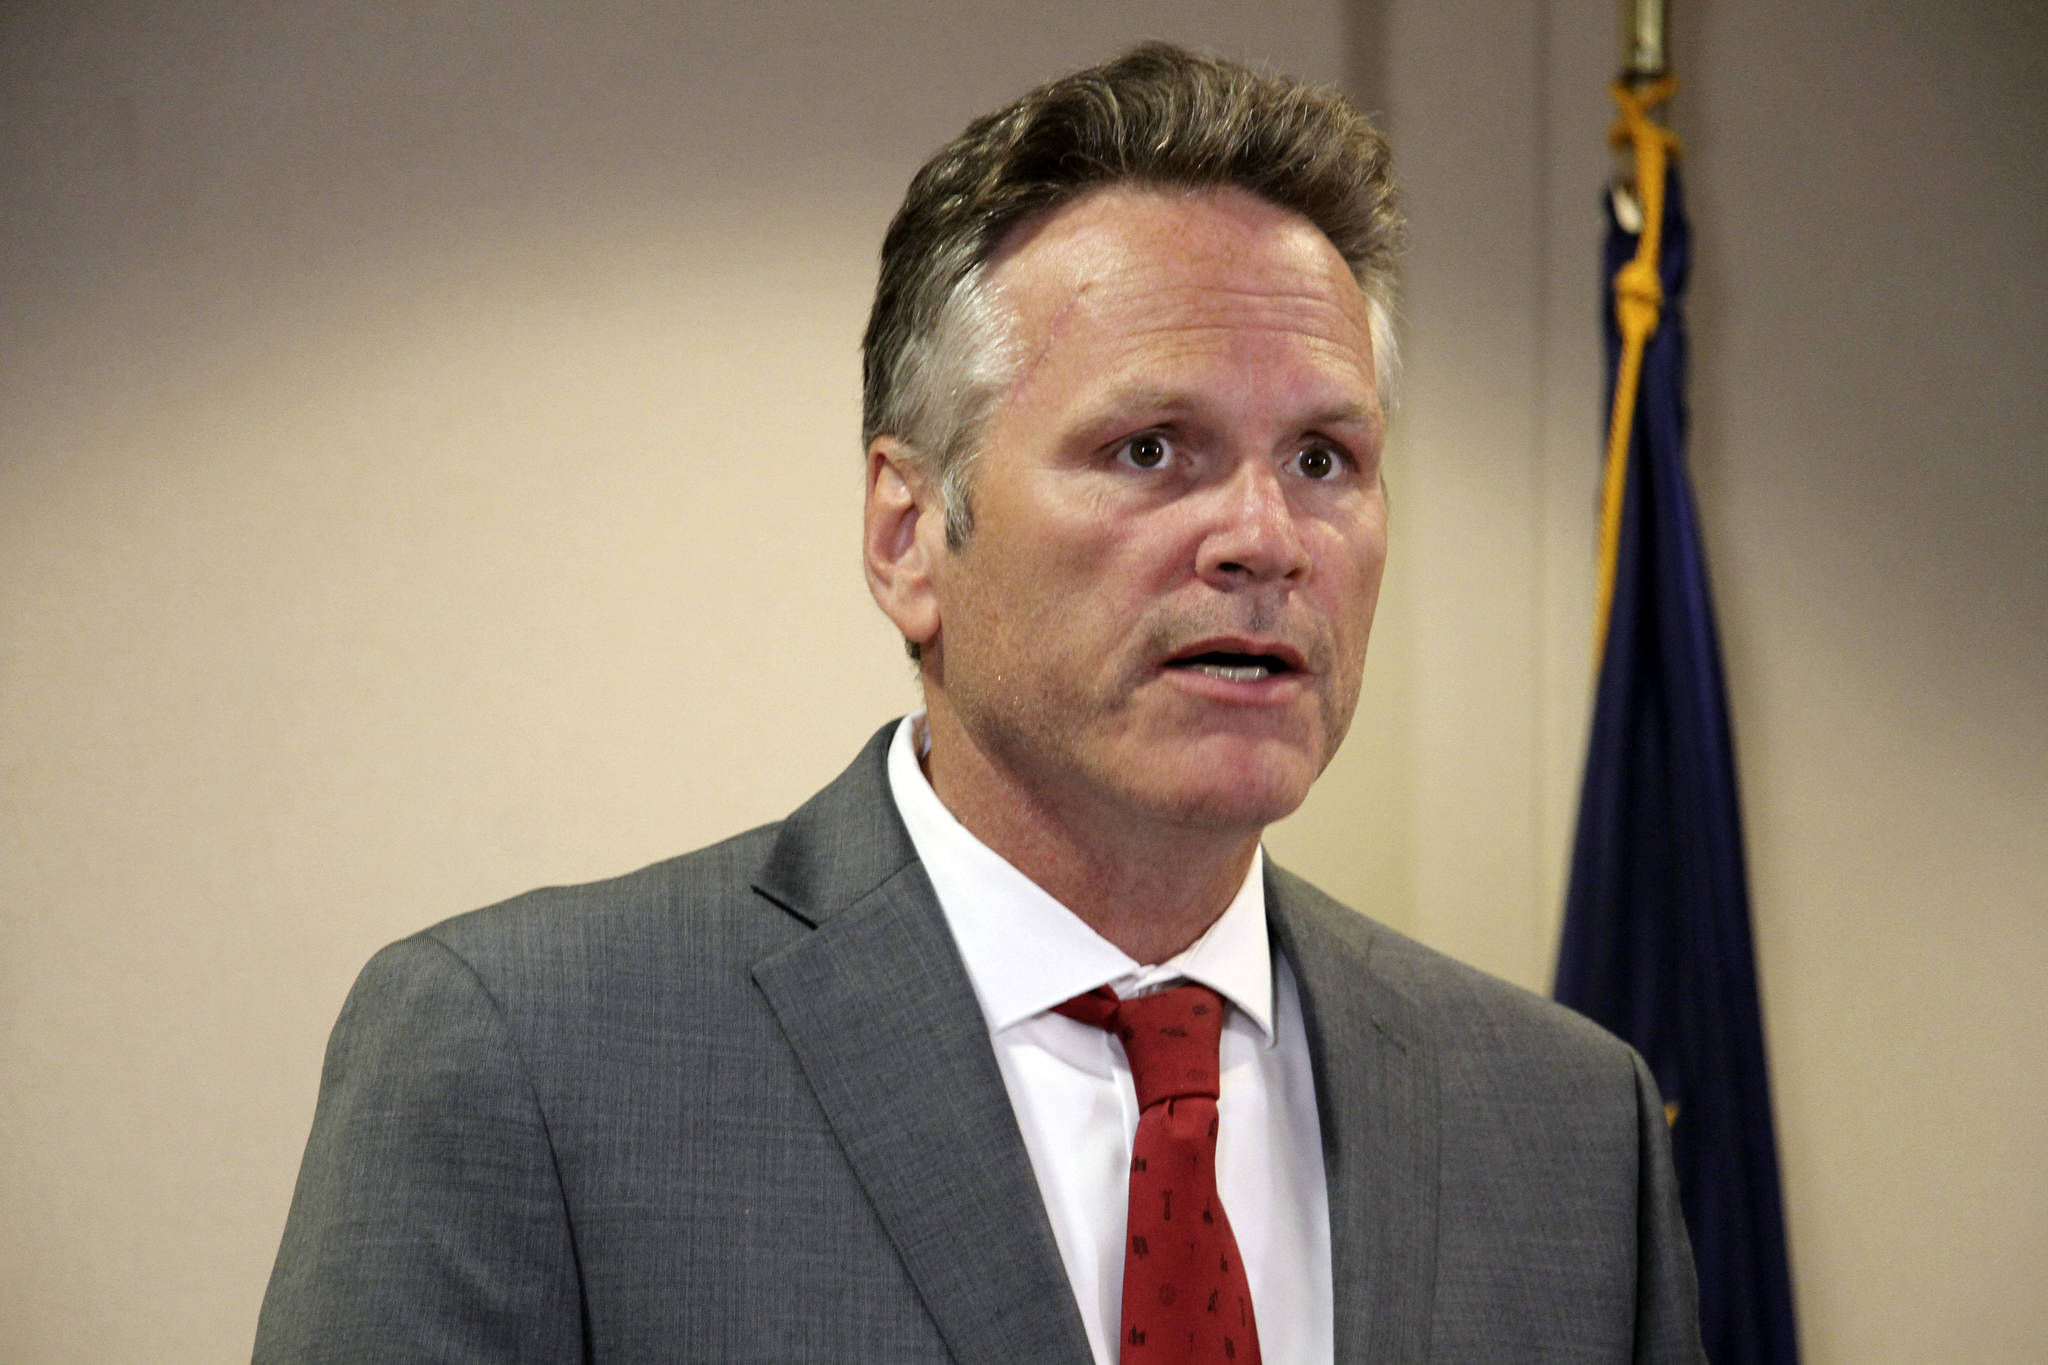 In this Aug. 13 file photo, Alaska Gov. Mike Dunleavy speaks at a news conference in Anchorage. (AP Photo | Mark Thiessen)